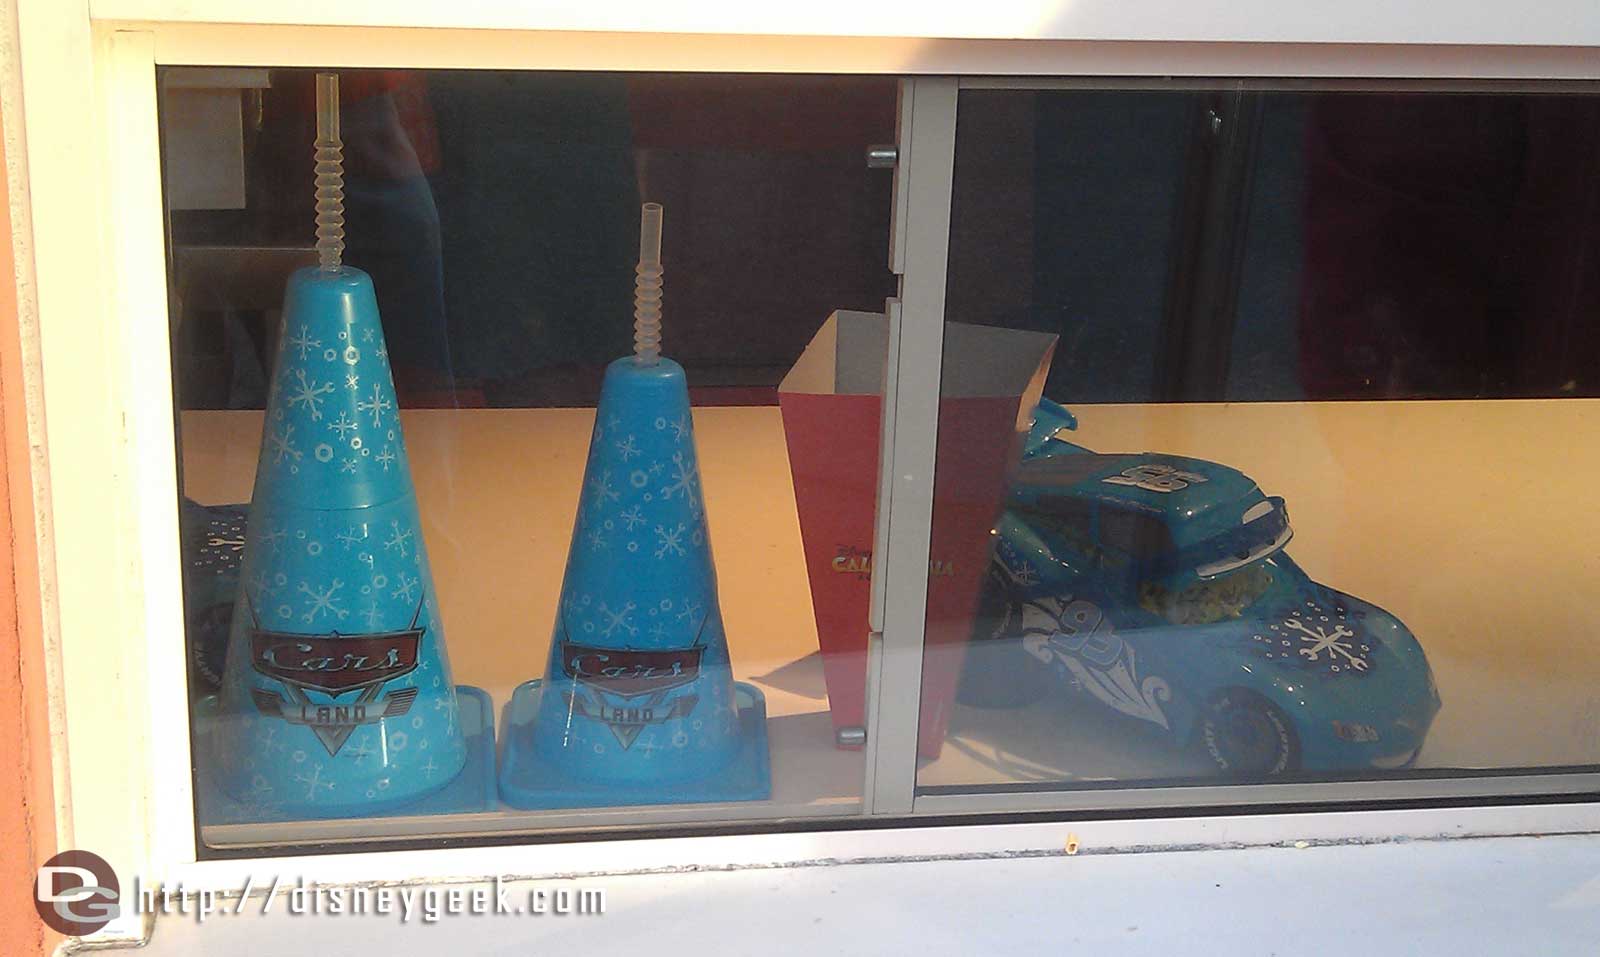 There are holiday inspired cone mugs and popcorn buckets.